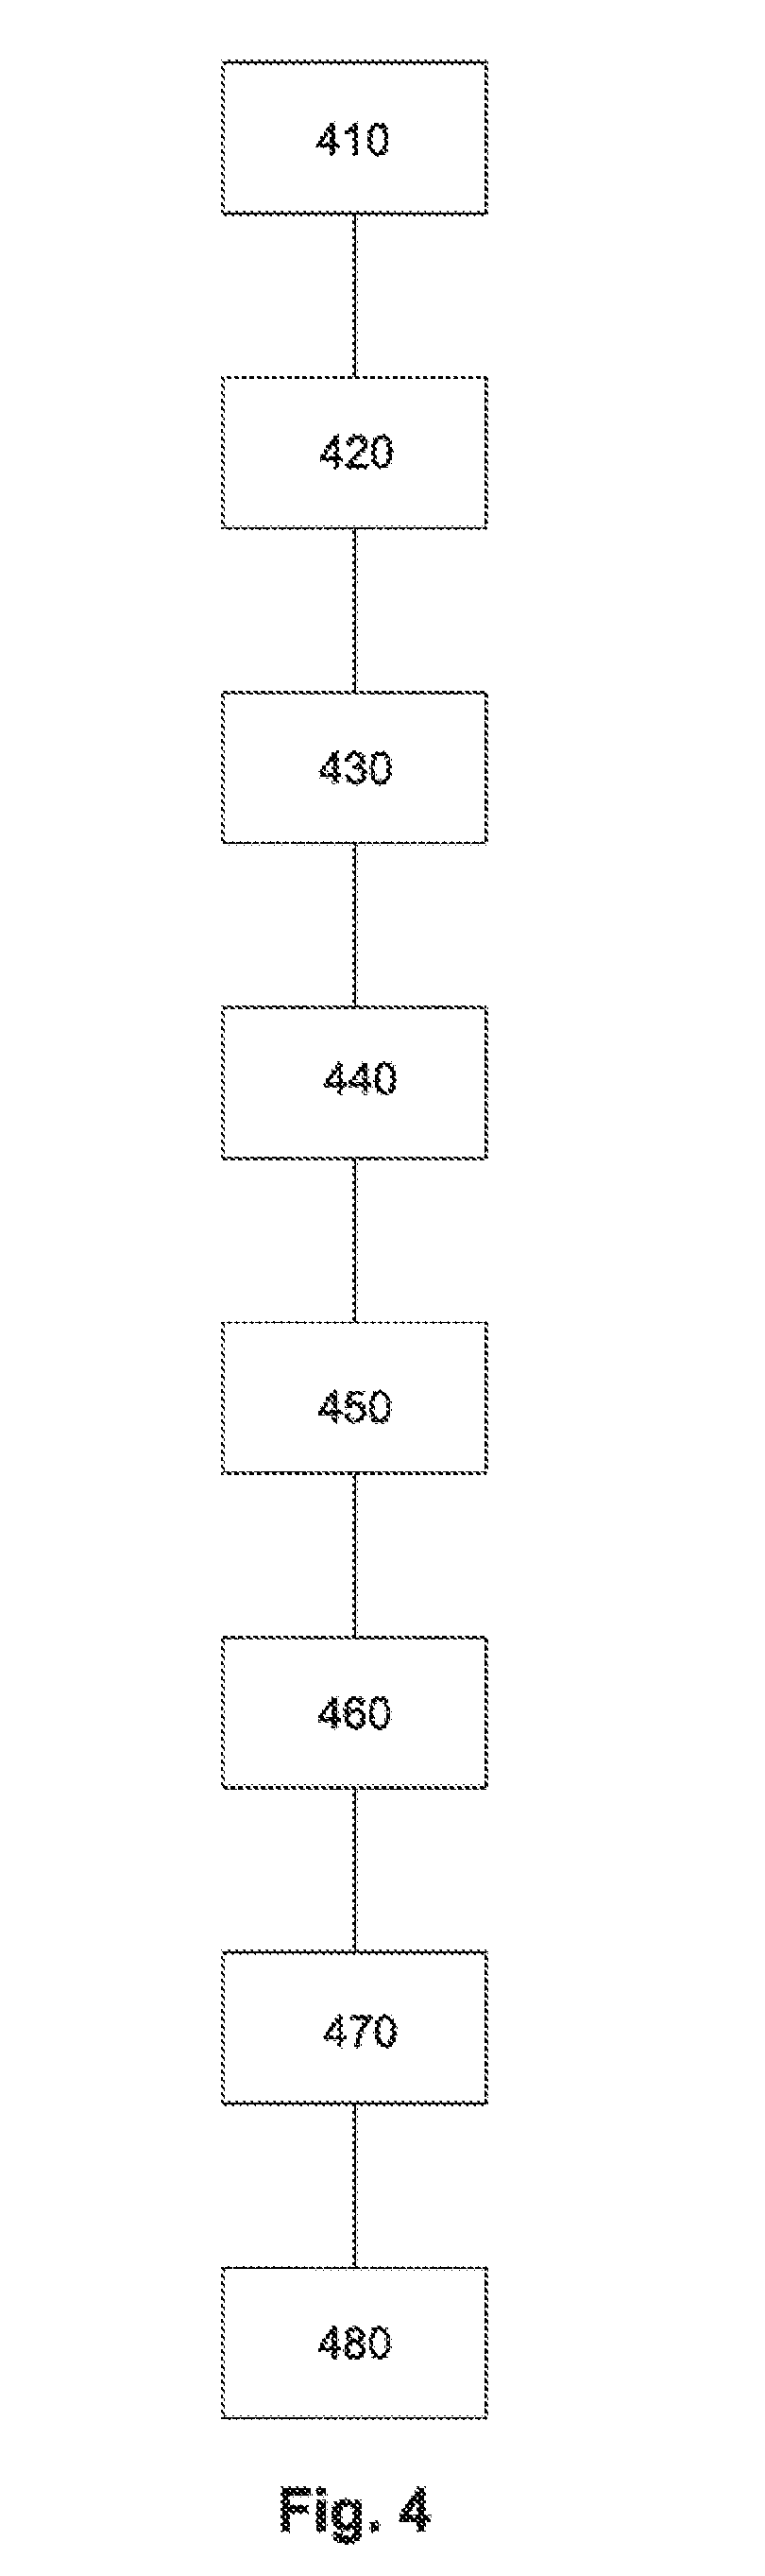 Method and device for compacting and consolidating a thick composite panel having a thermoplastic matrix